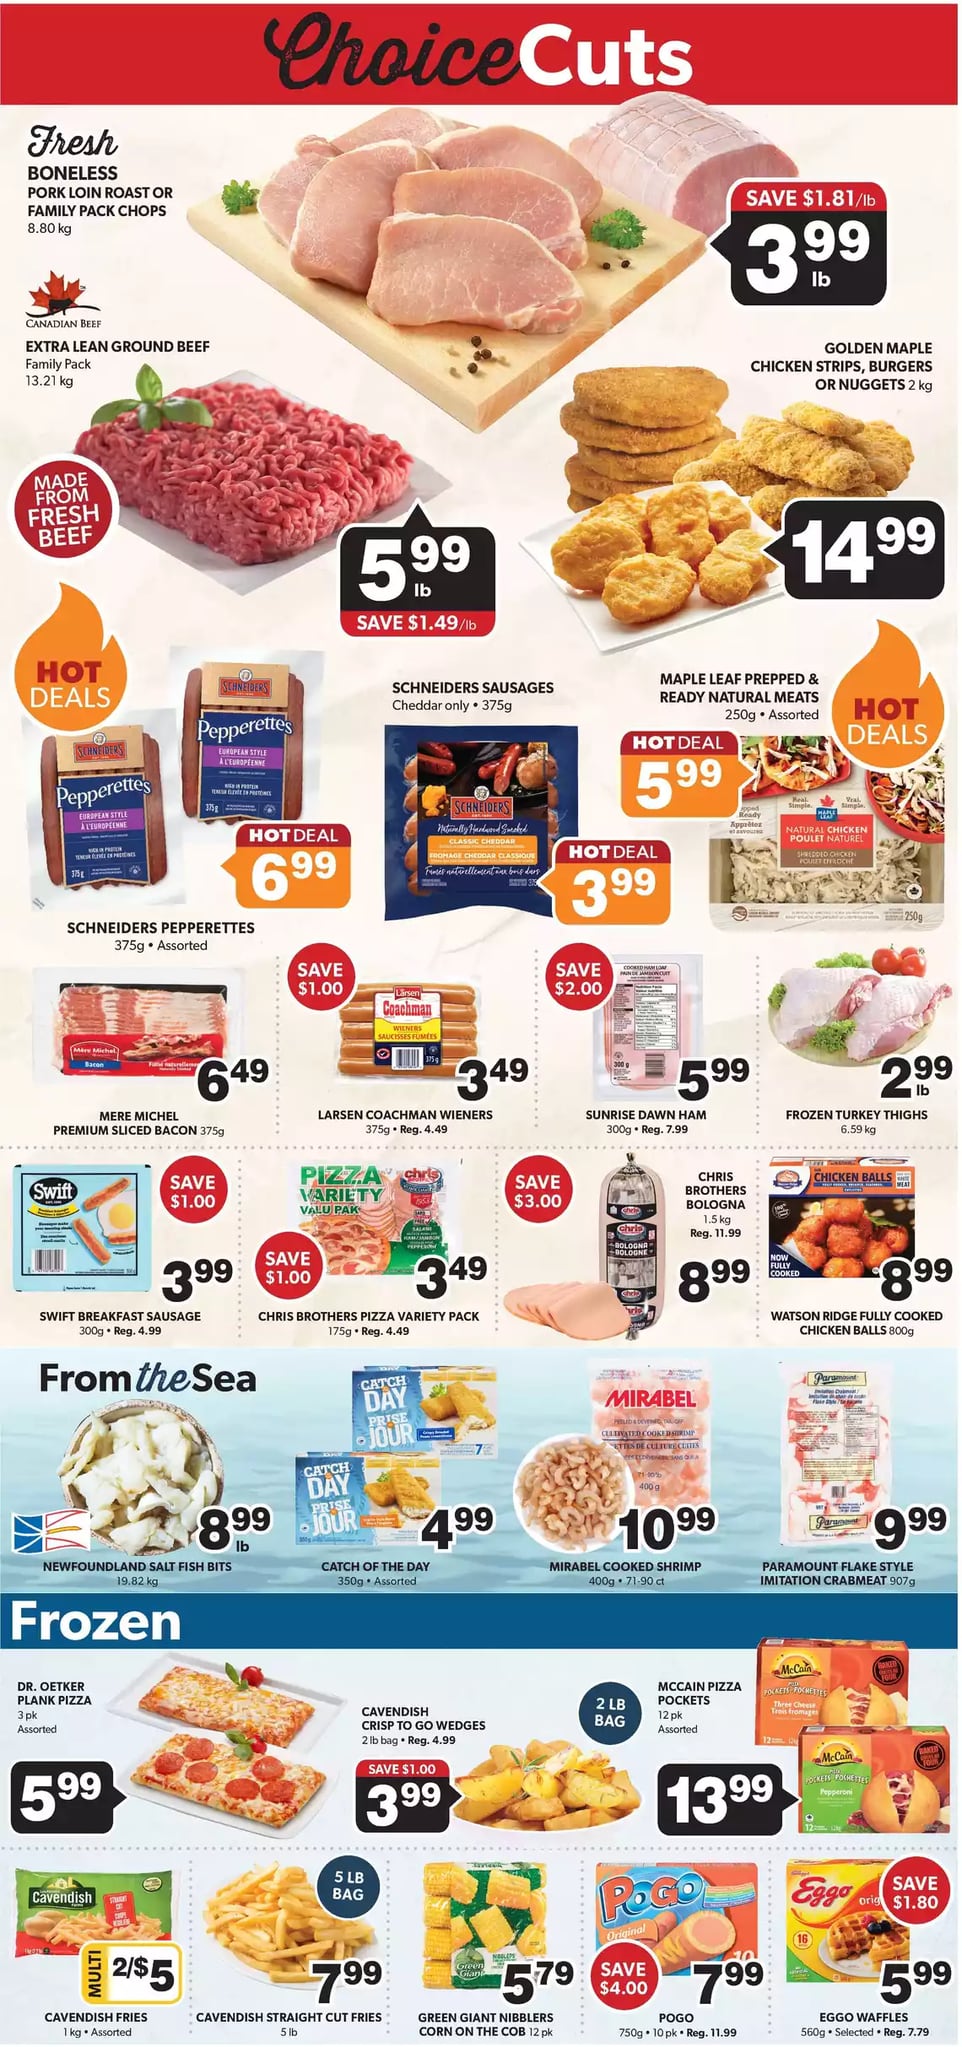 Colemans - Weekly Flyer Specials - Page 3